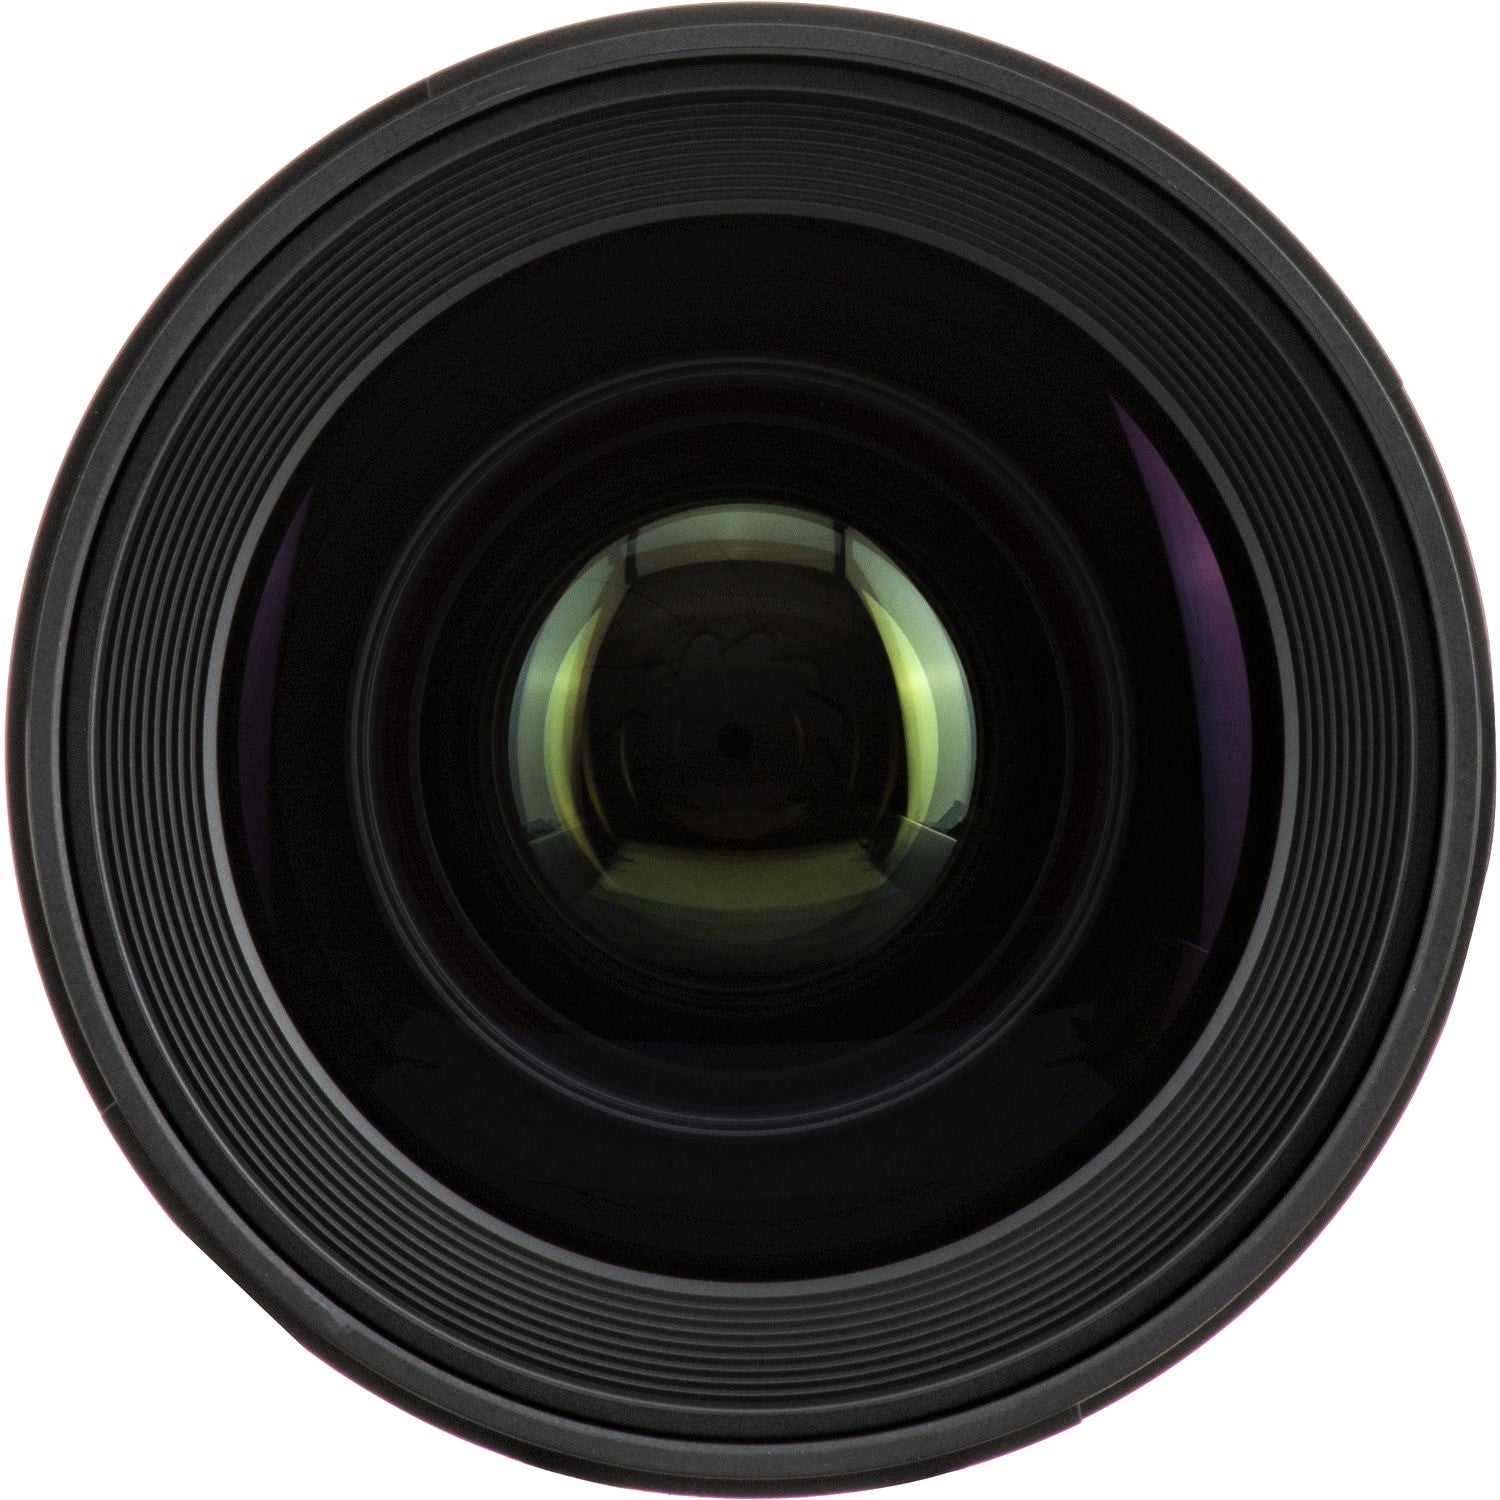 Sigma 35mm F1.2 DG DN Art Lens for Leica L in a Front Close-Up View